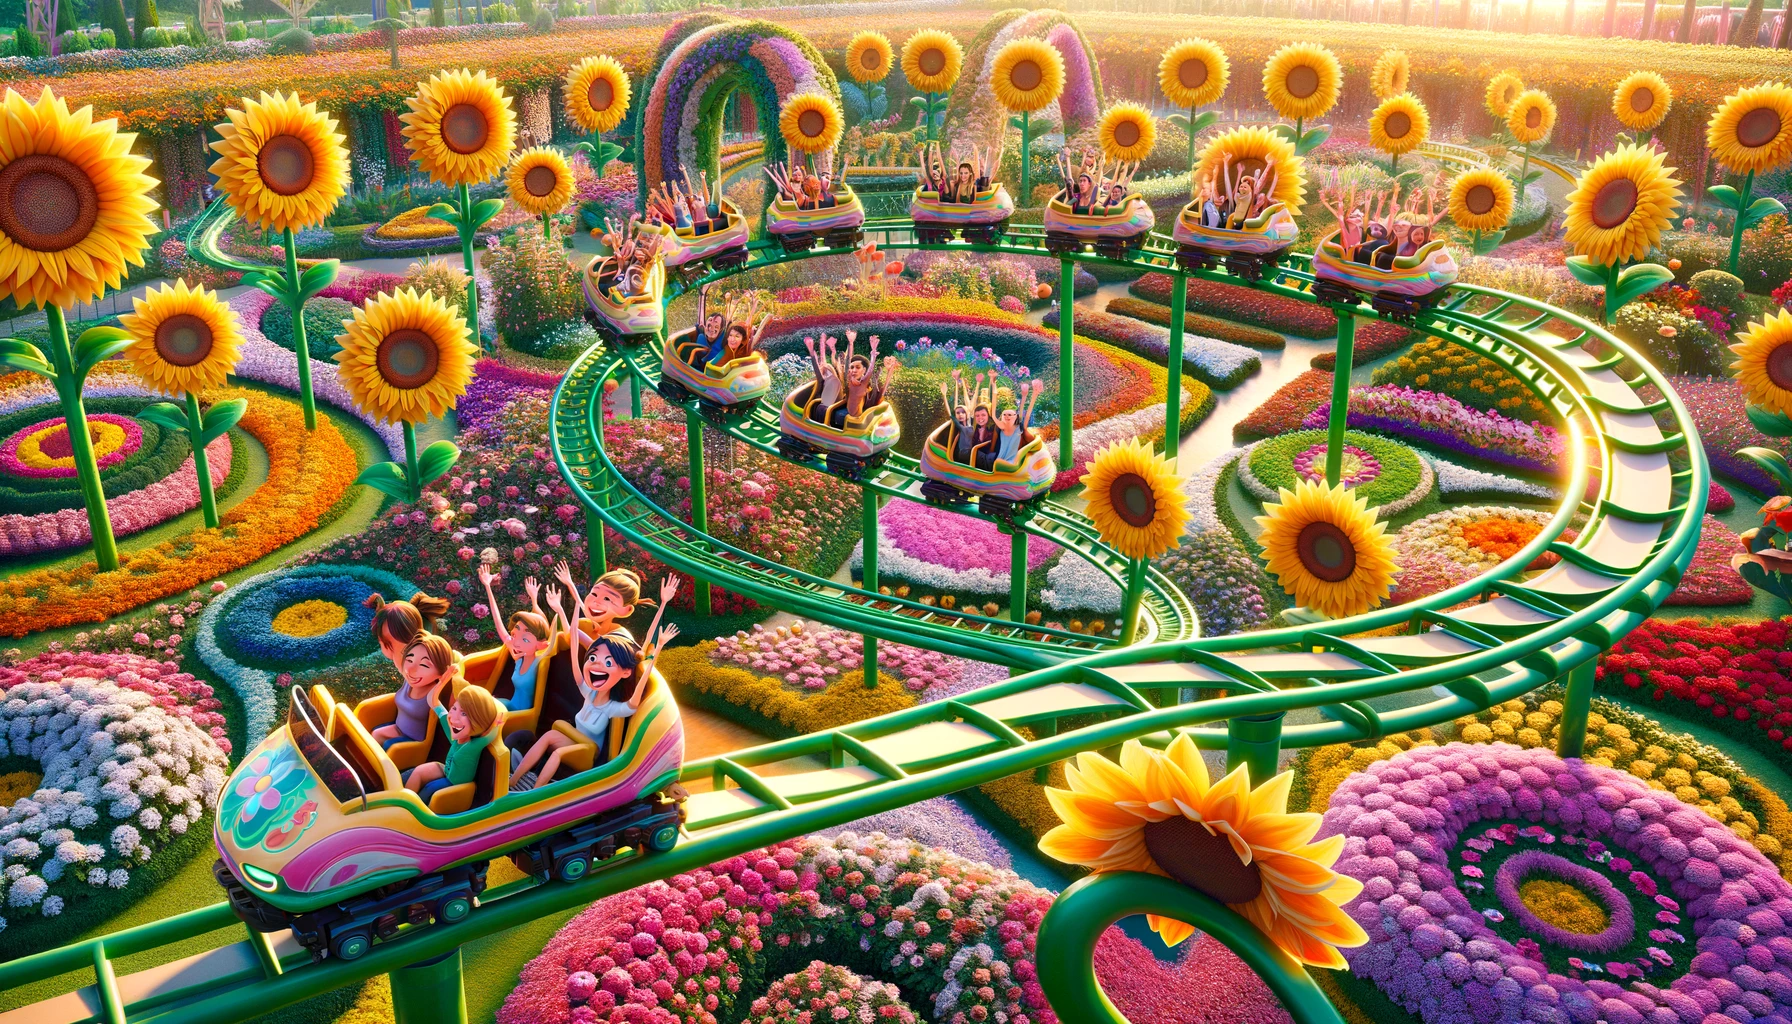 The roller coaster in the flower garden? They call it the Petal Plunge - Roller Coaster Pun